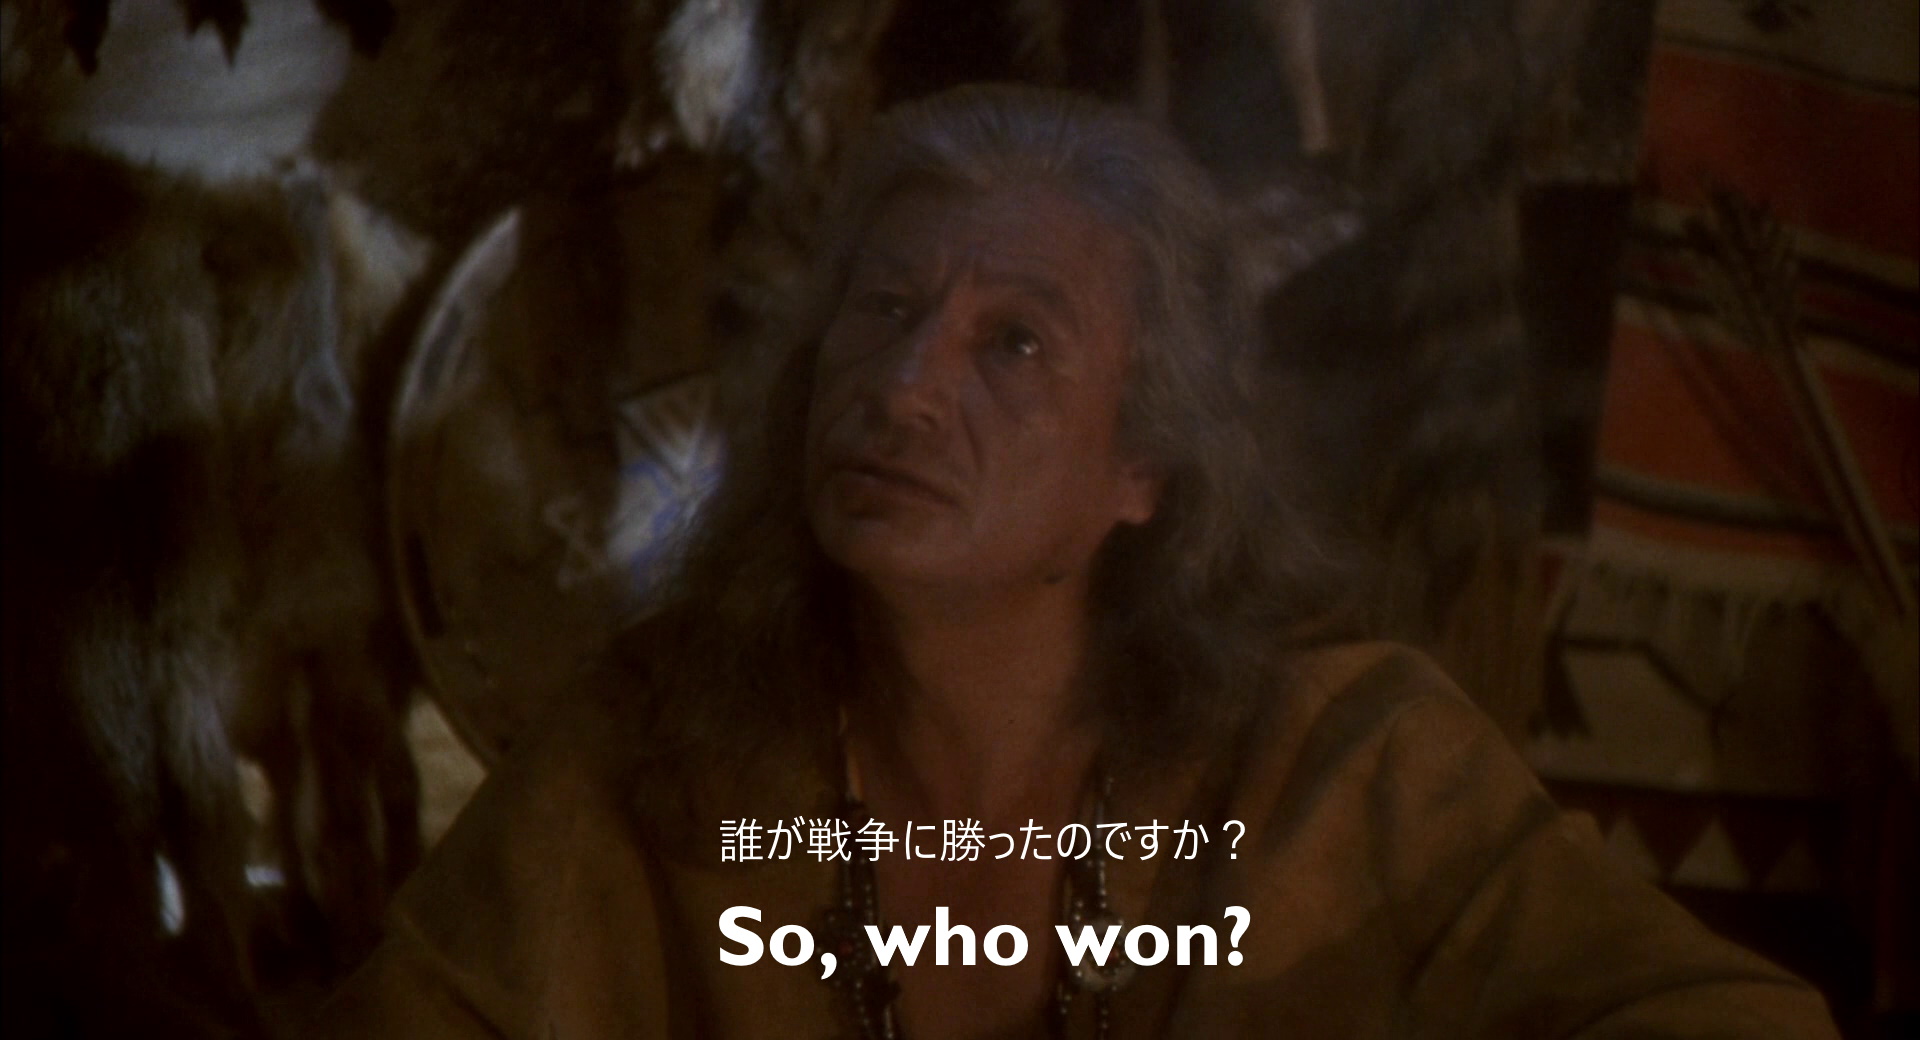 Still from Hot Shots!. Owatonna, an older Native American man, sits surrounded by animal skins. An English subtitle reads "So, who won?" A Japanese subtitle reads "誰が戦争に勝ったのですか?", which translates as "Who won the war?"